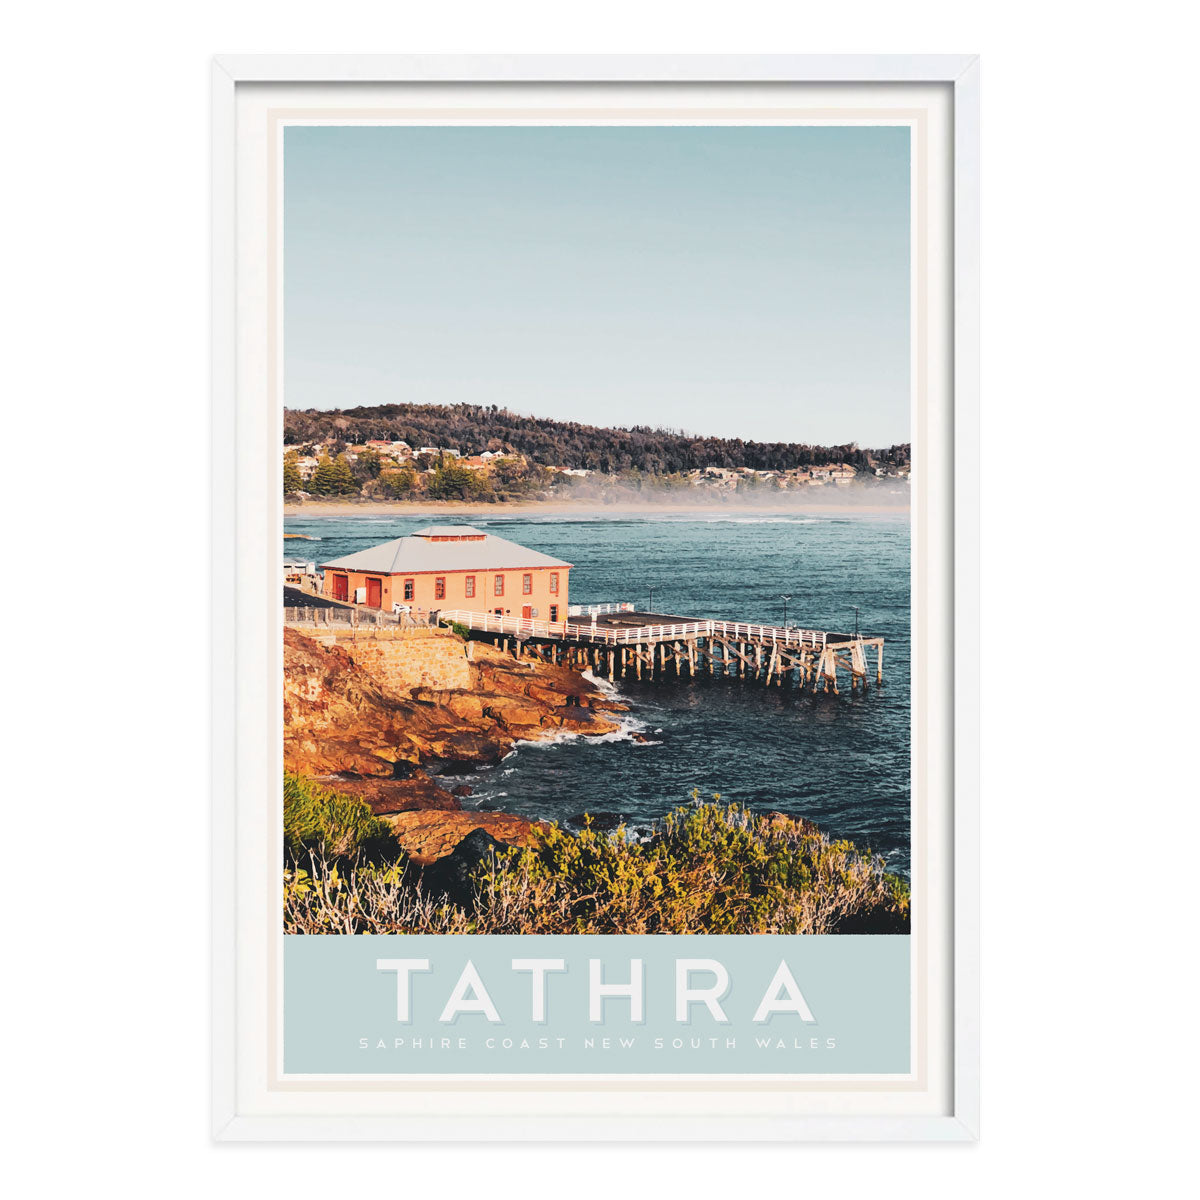 Tathra NSW vintage retro travel poster in white frame by Places we Luv 